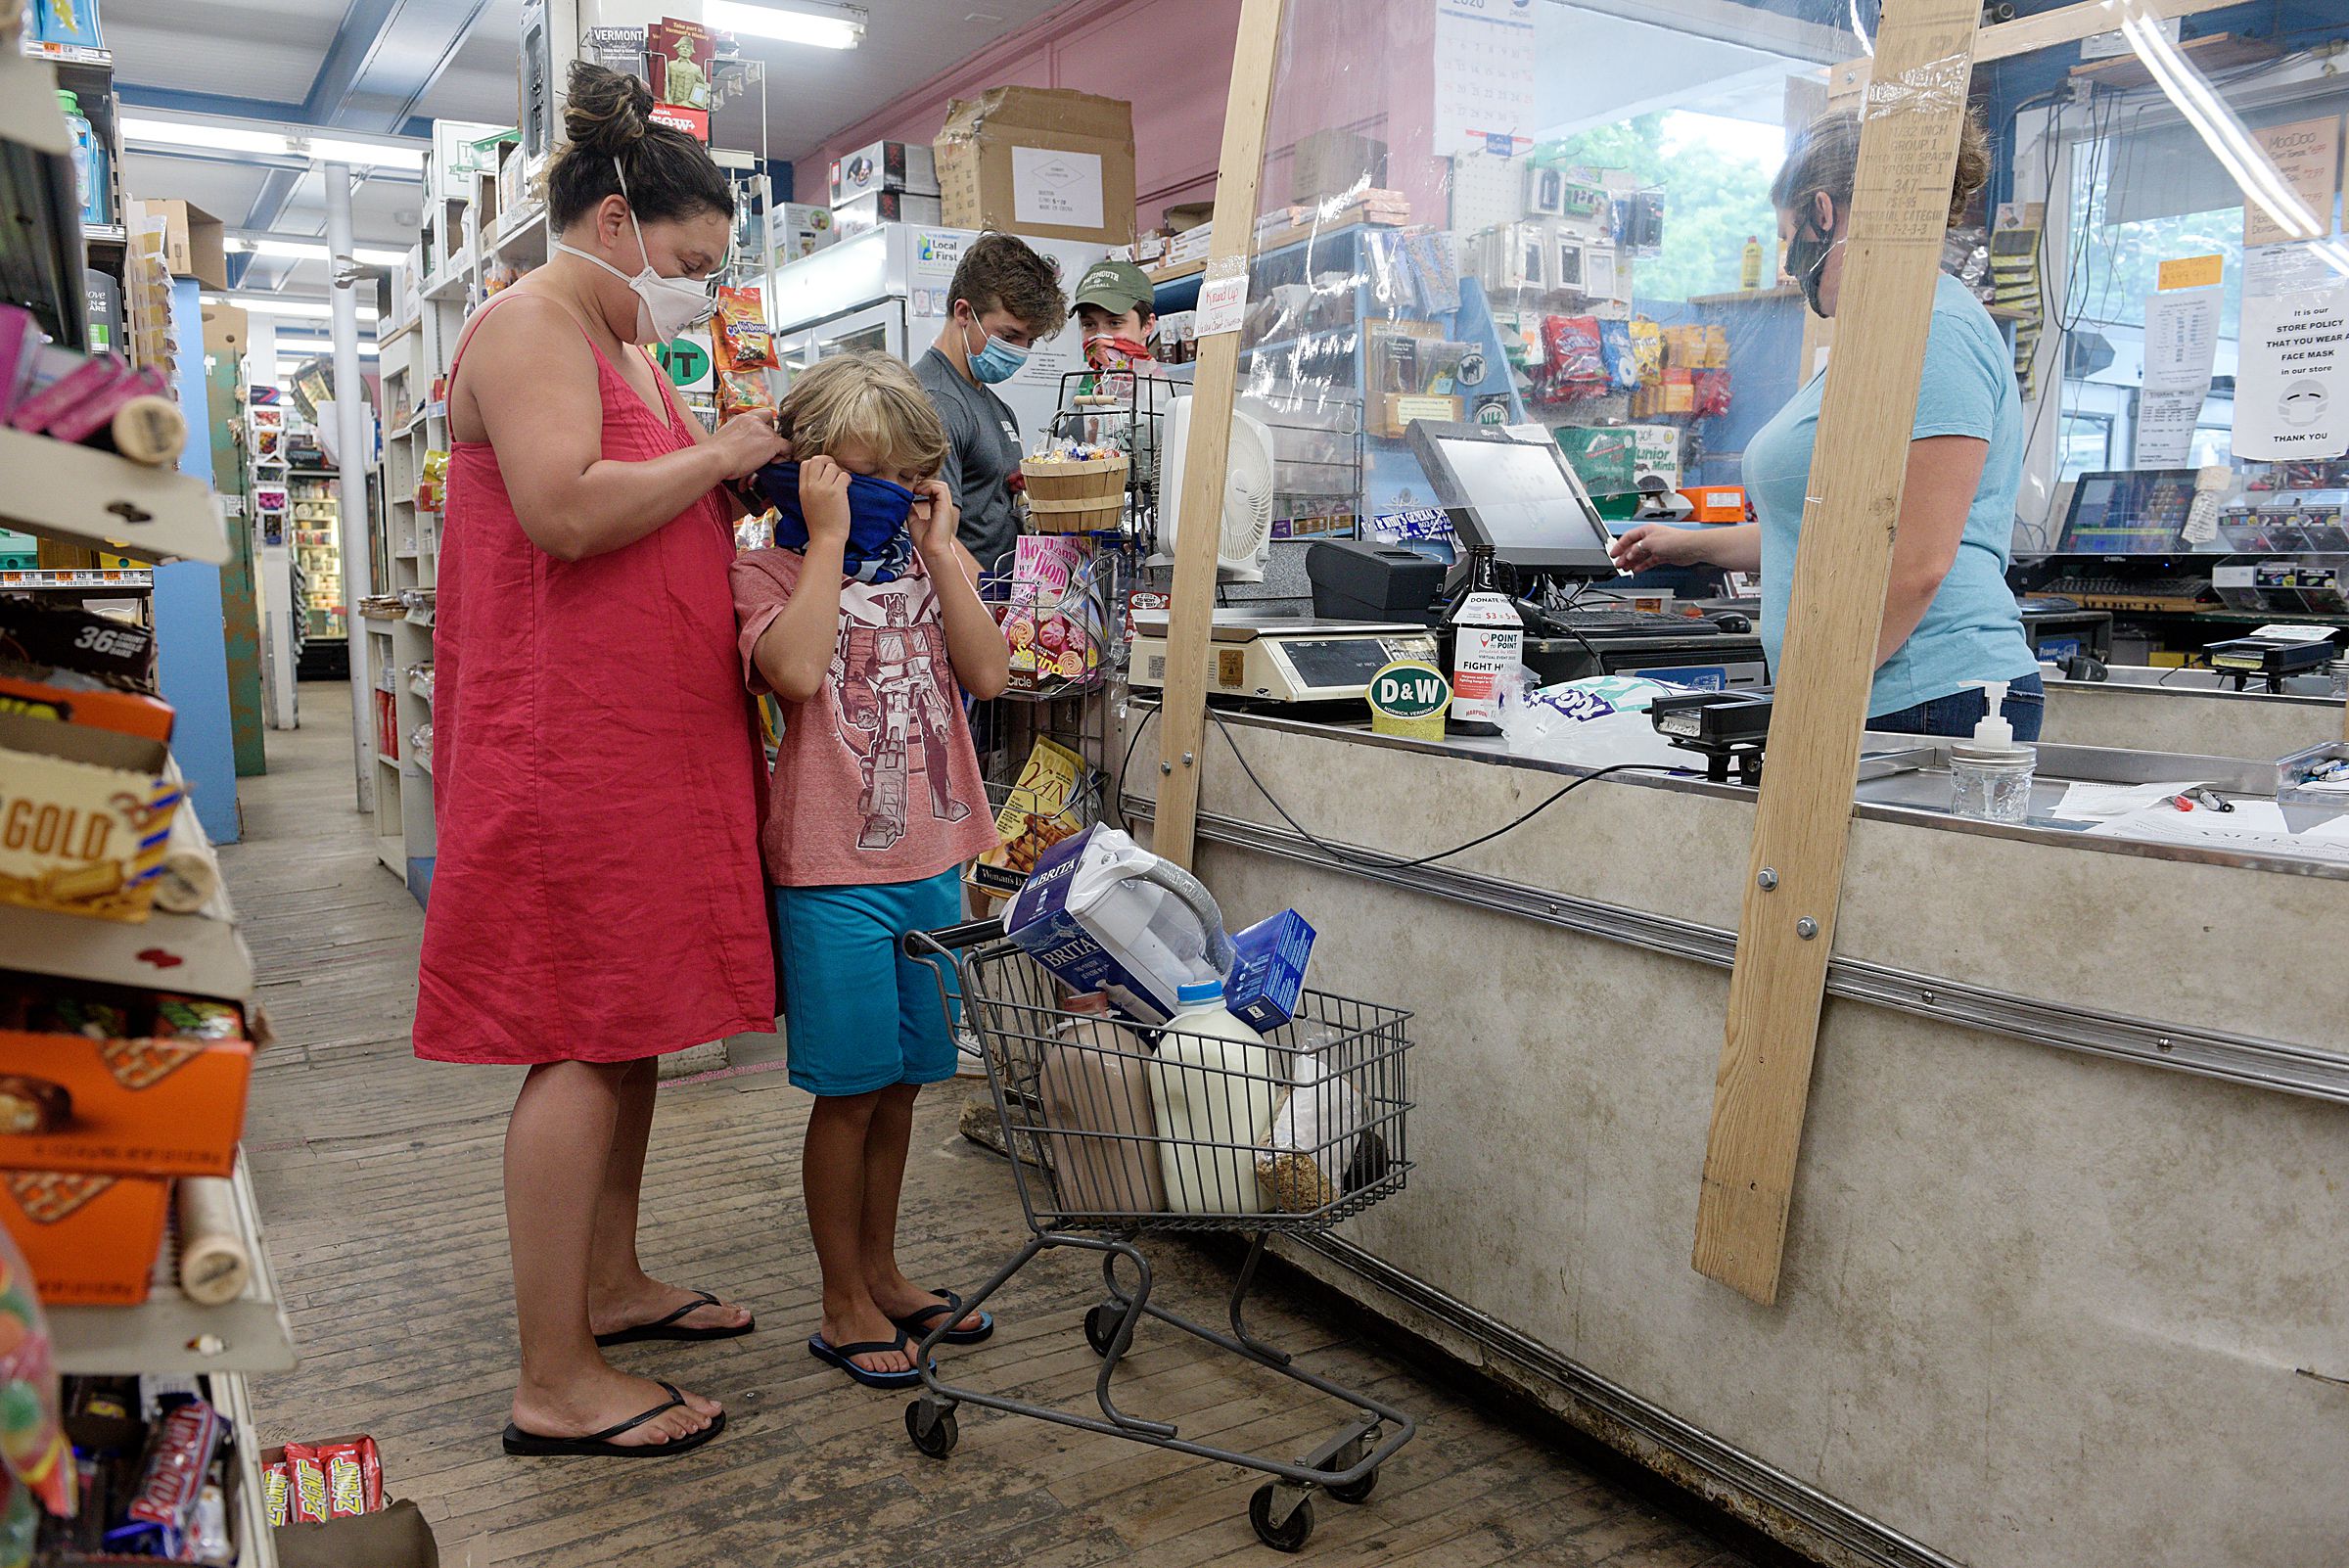 Nichole Rossi, of Norwich, adjusts her son Josh’s mask as they step up to pay for groceries at Dan and Whit’s general store in Norwich, Vt., Thursday, July 9, 2020. (Valley News - James M. Patterson) Copyright Valley News. May not be reprinted or used online without permission. Send requests to permission@vnews.com.